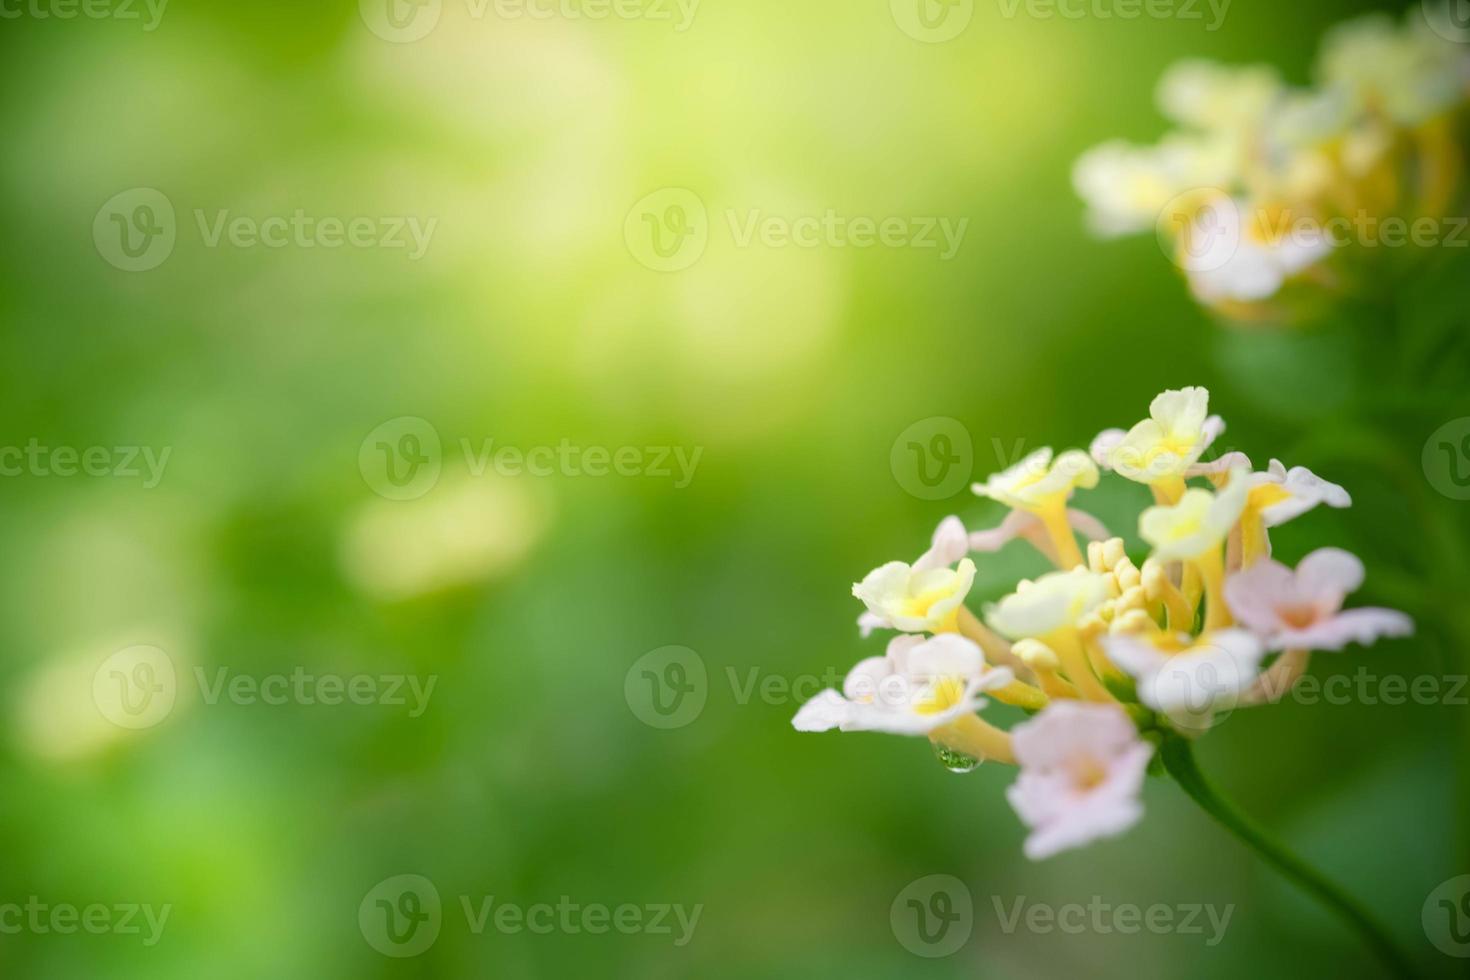 Close up Nature of flower in garden view of green leaf on blurred background in garden. Natural green leaves plants used as spring cover page greenery environment ecology lime green wallpaper photo